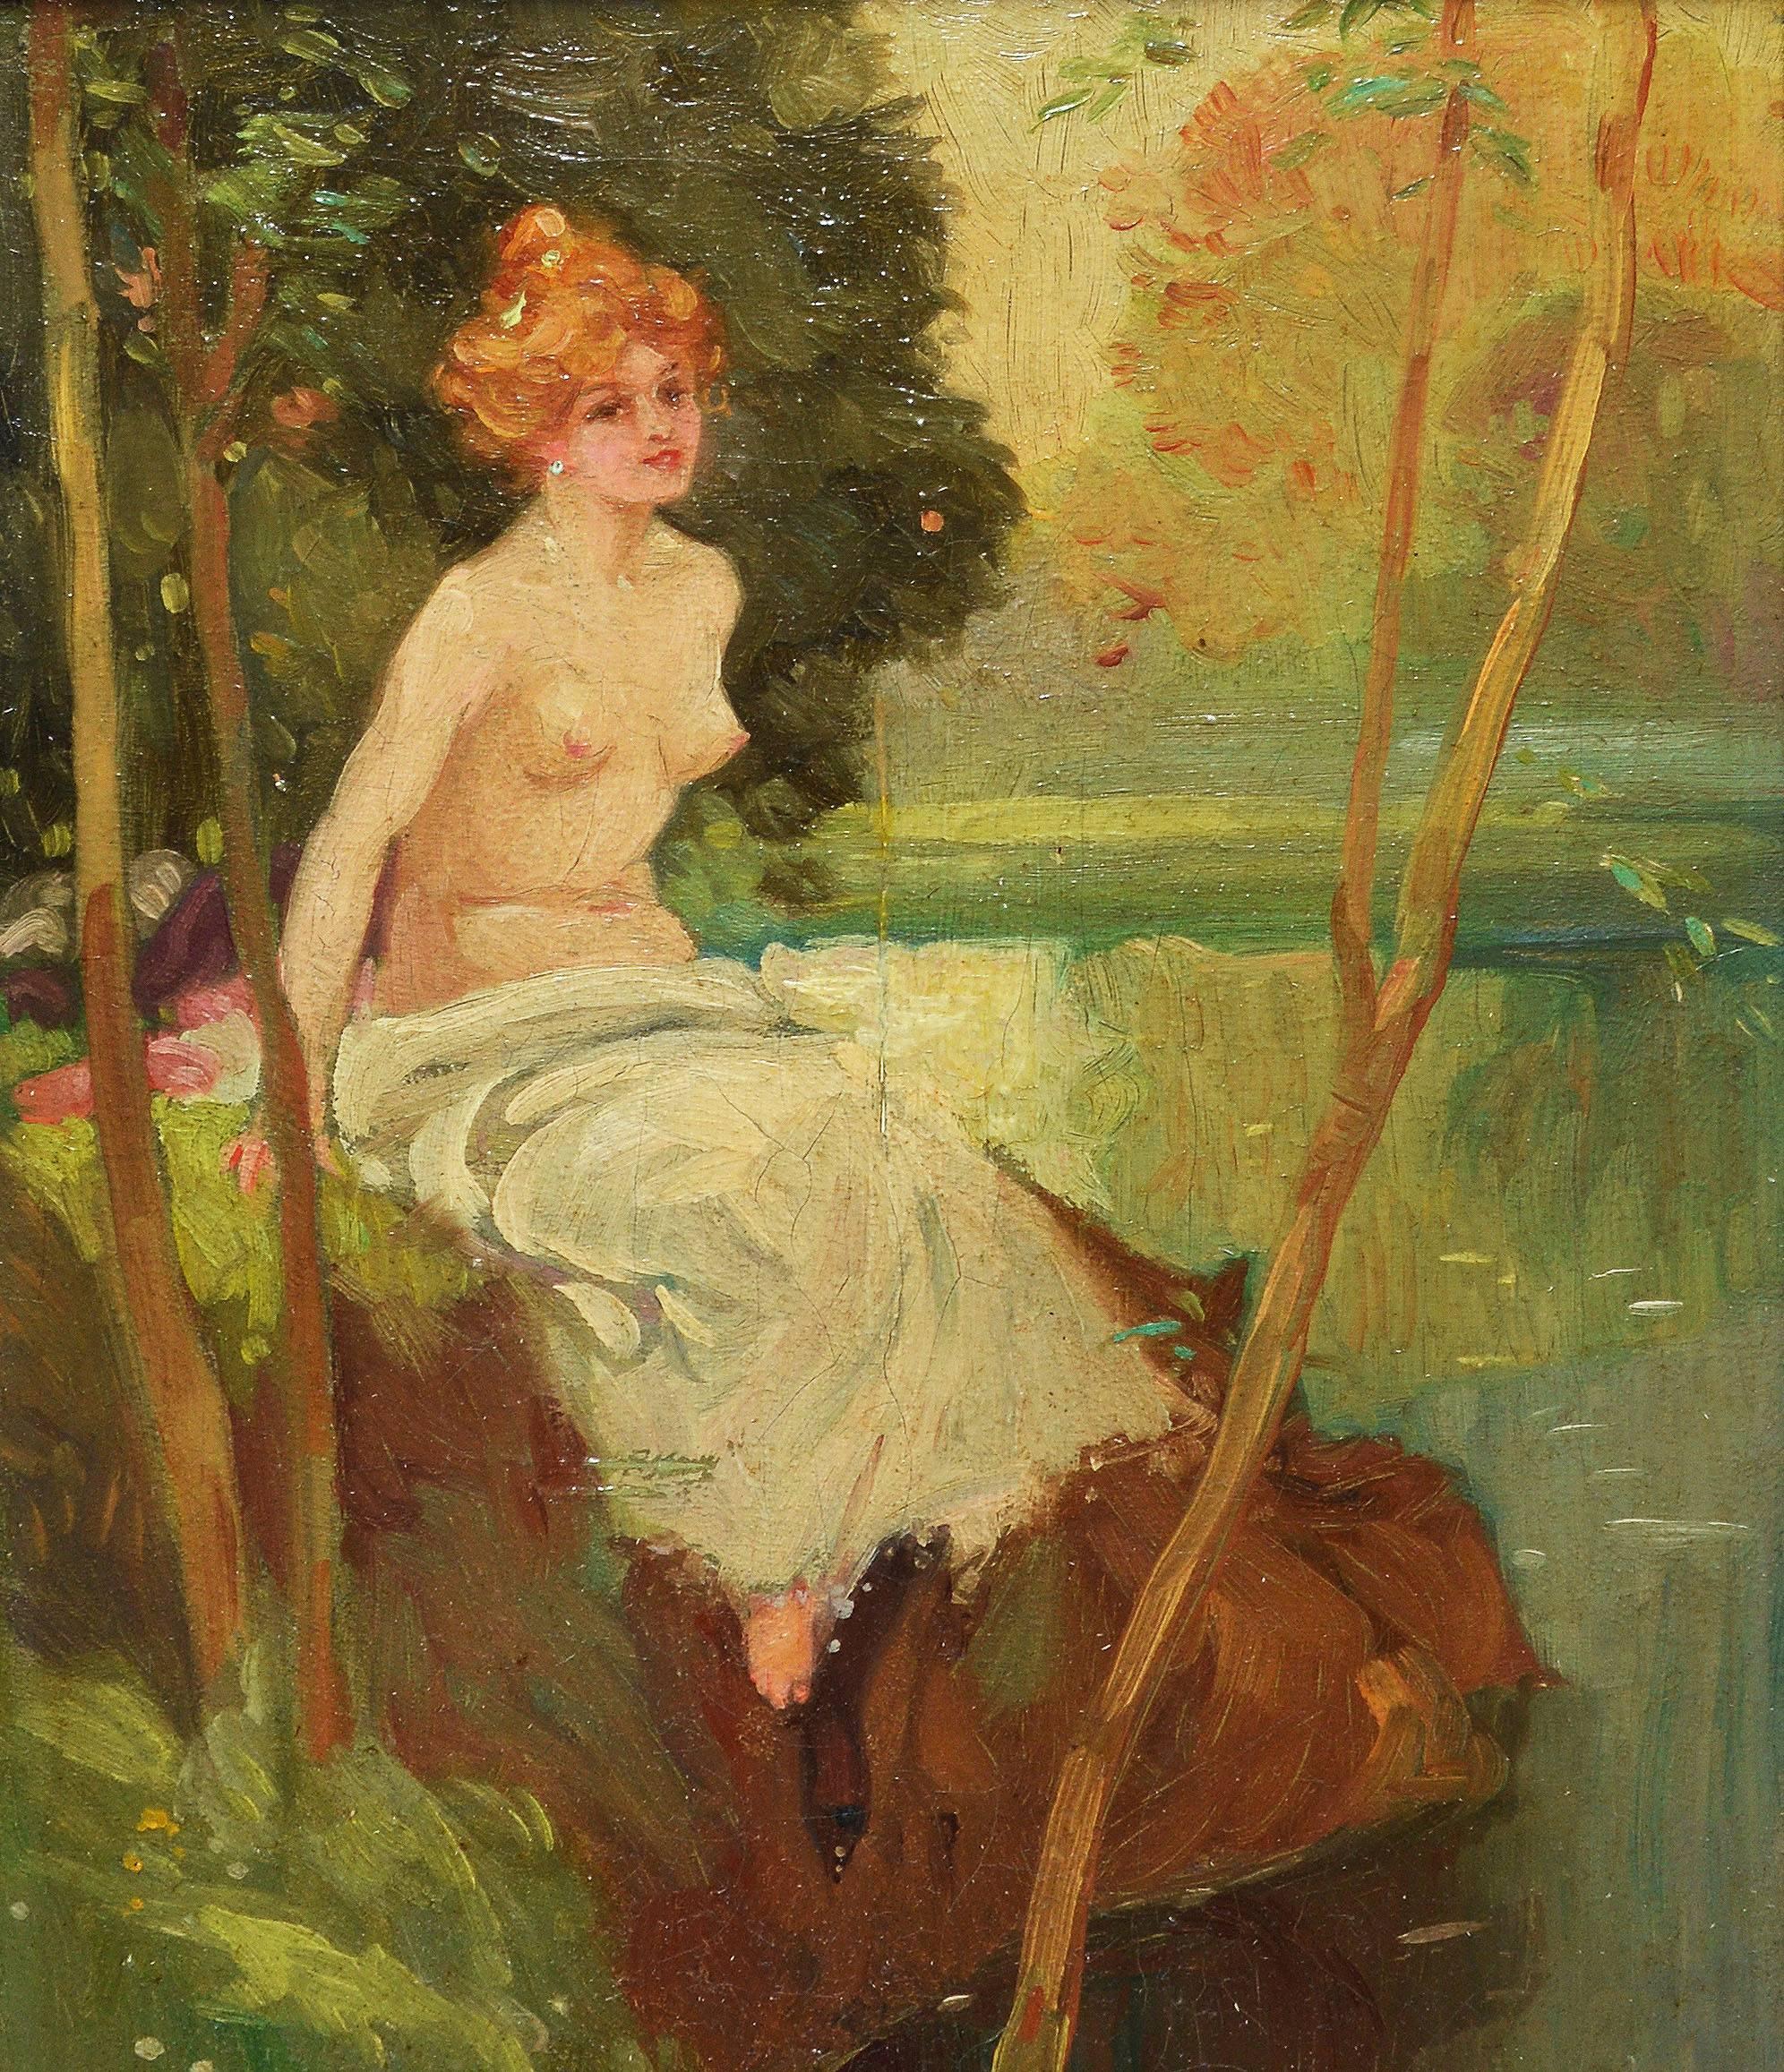 Nude in a Forest - Brown Nude Painting by Unknown